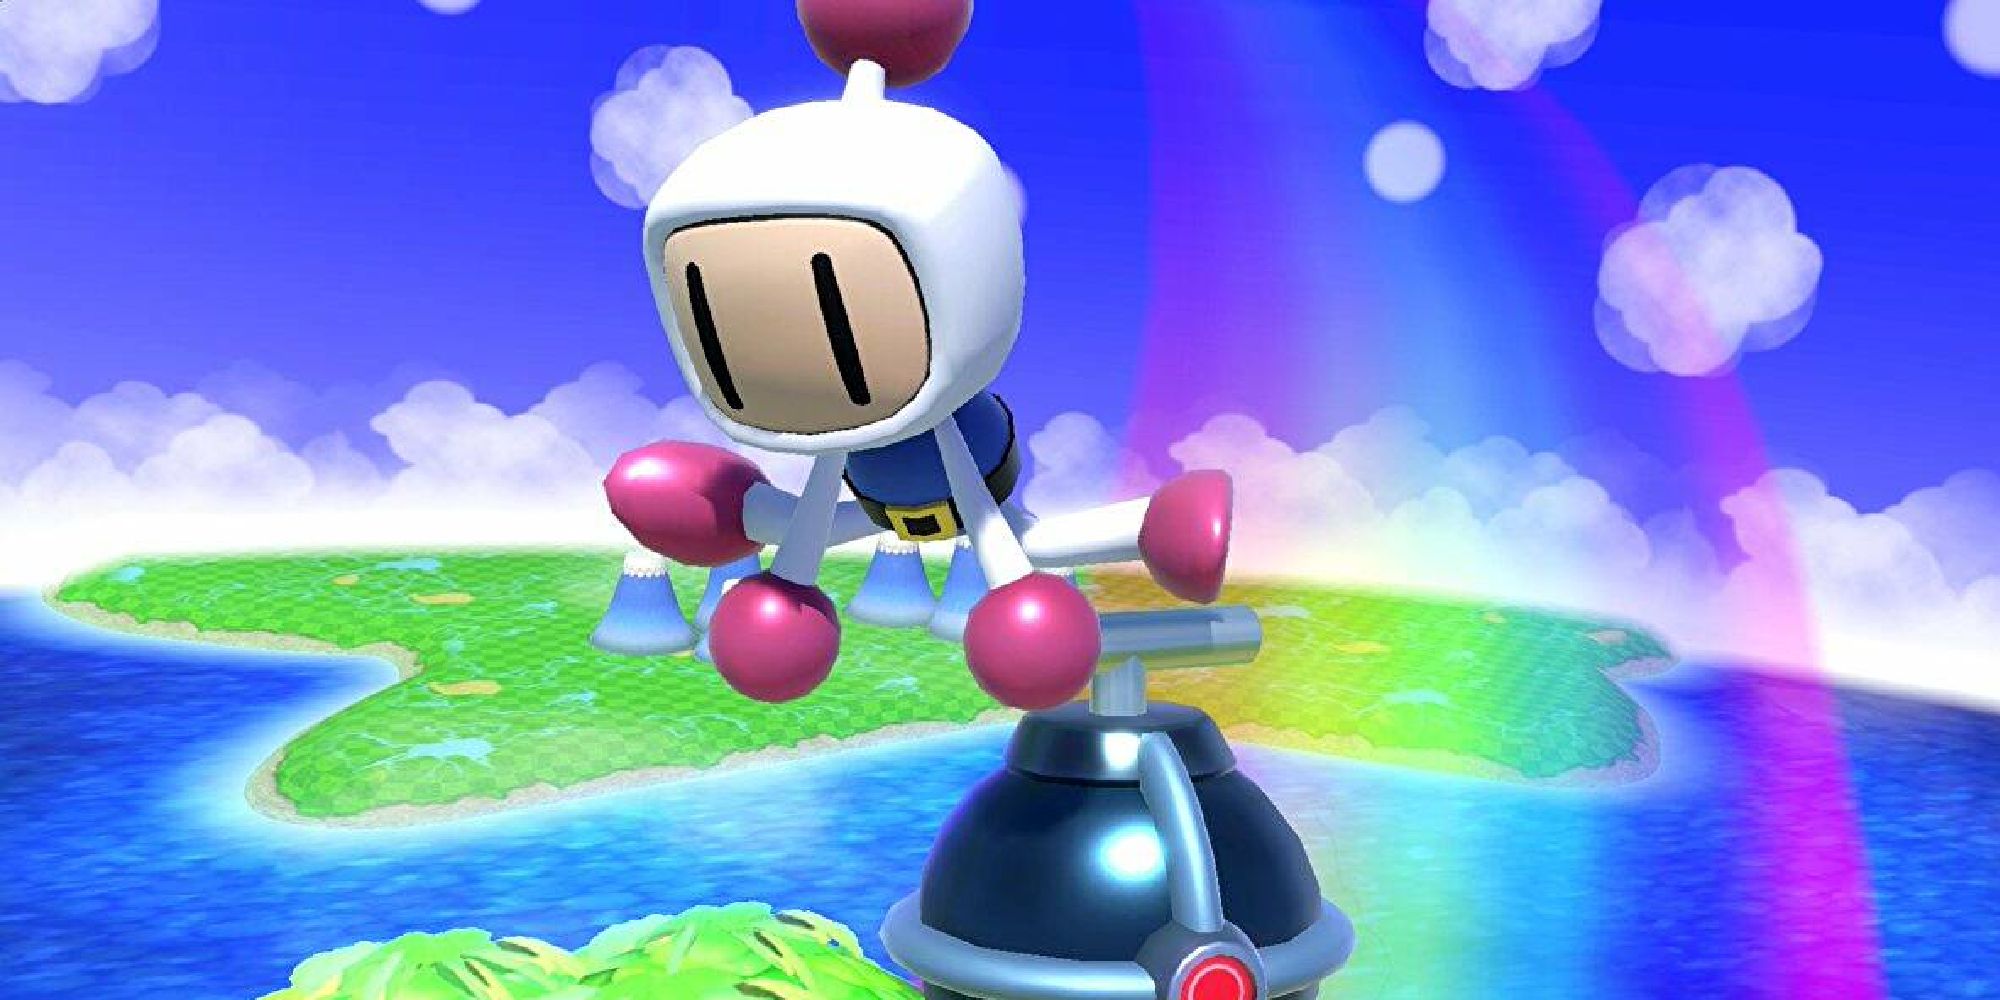 Bomberman placing a remote bomb in mid-air in Smash Bros Ultimate